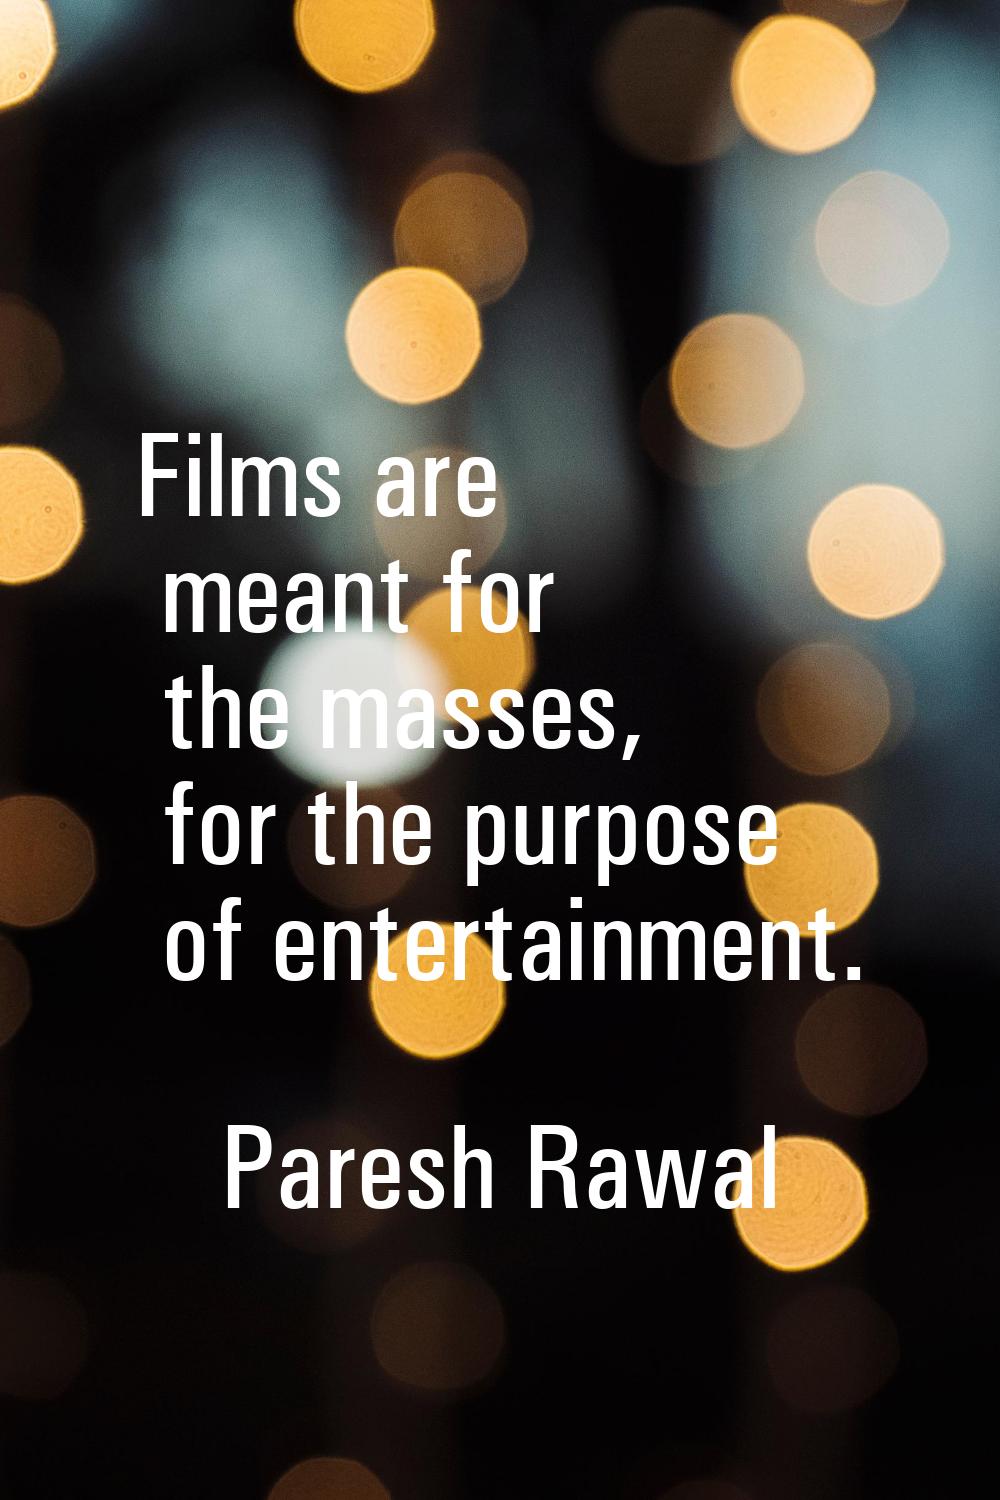 Films are meant for the masses, for the purpose of entertainment.